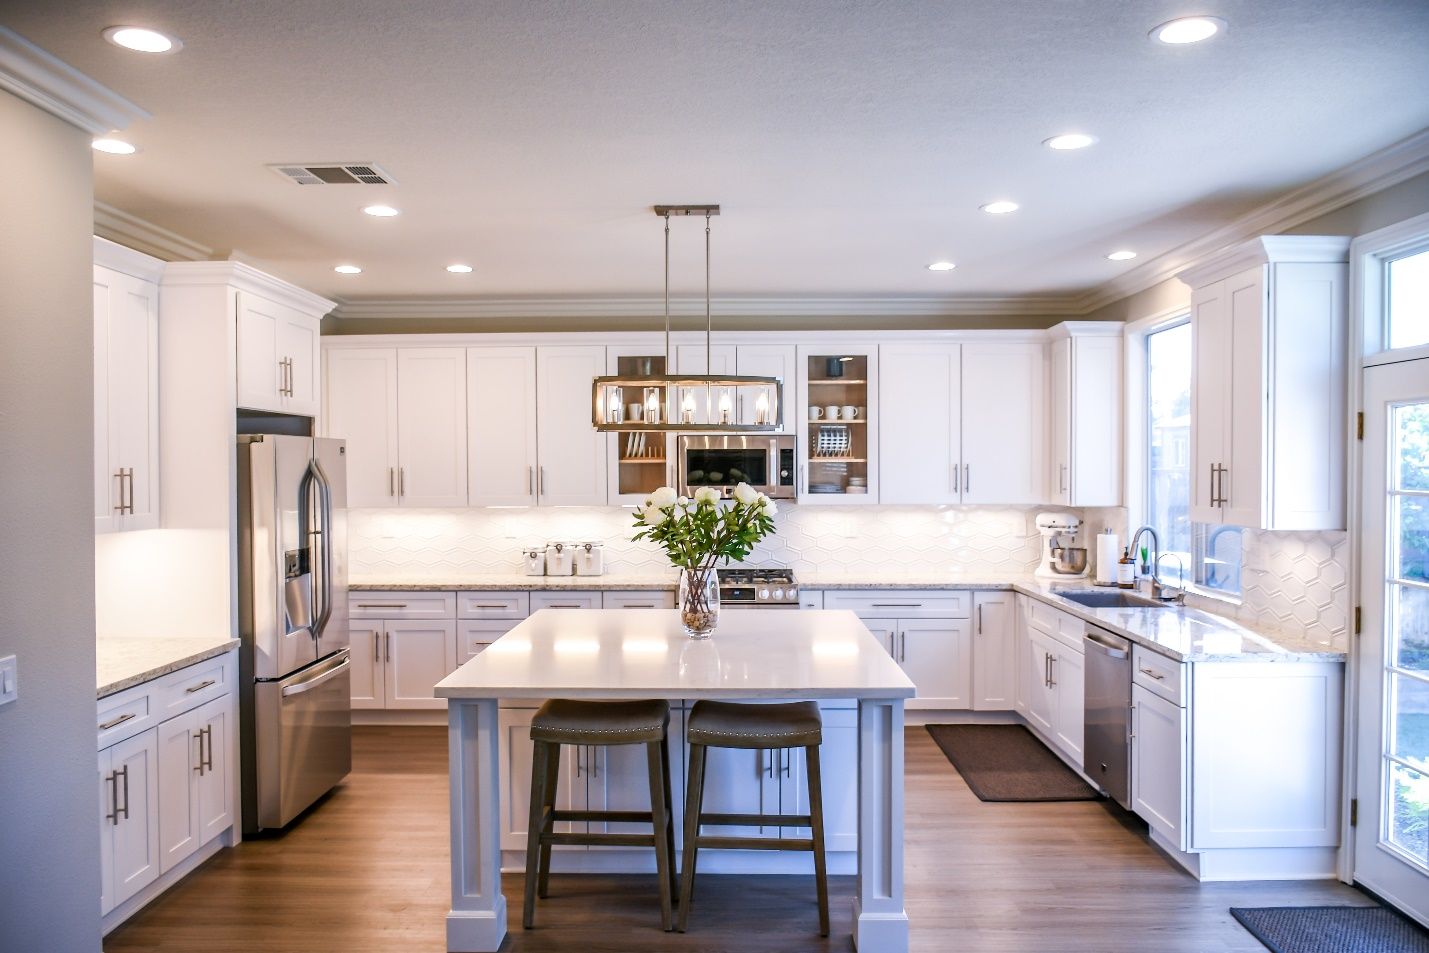 White Cabinets With White Kitchen Island In the Center